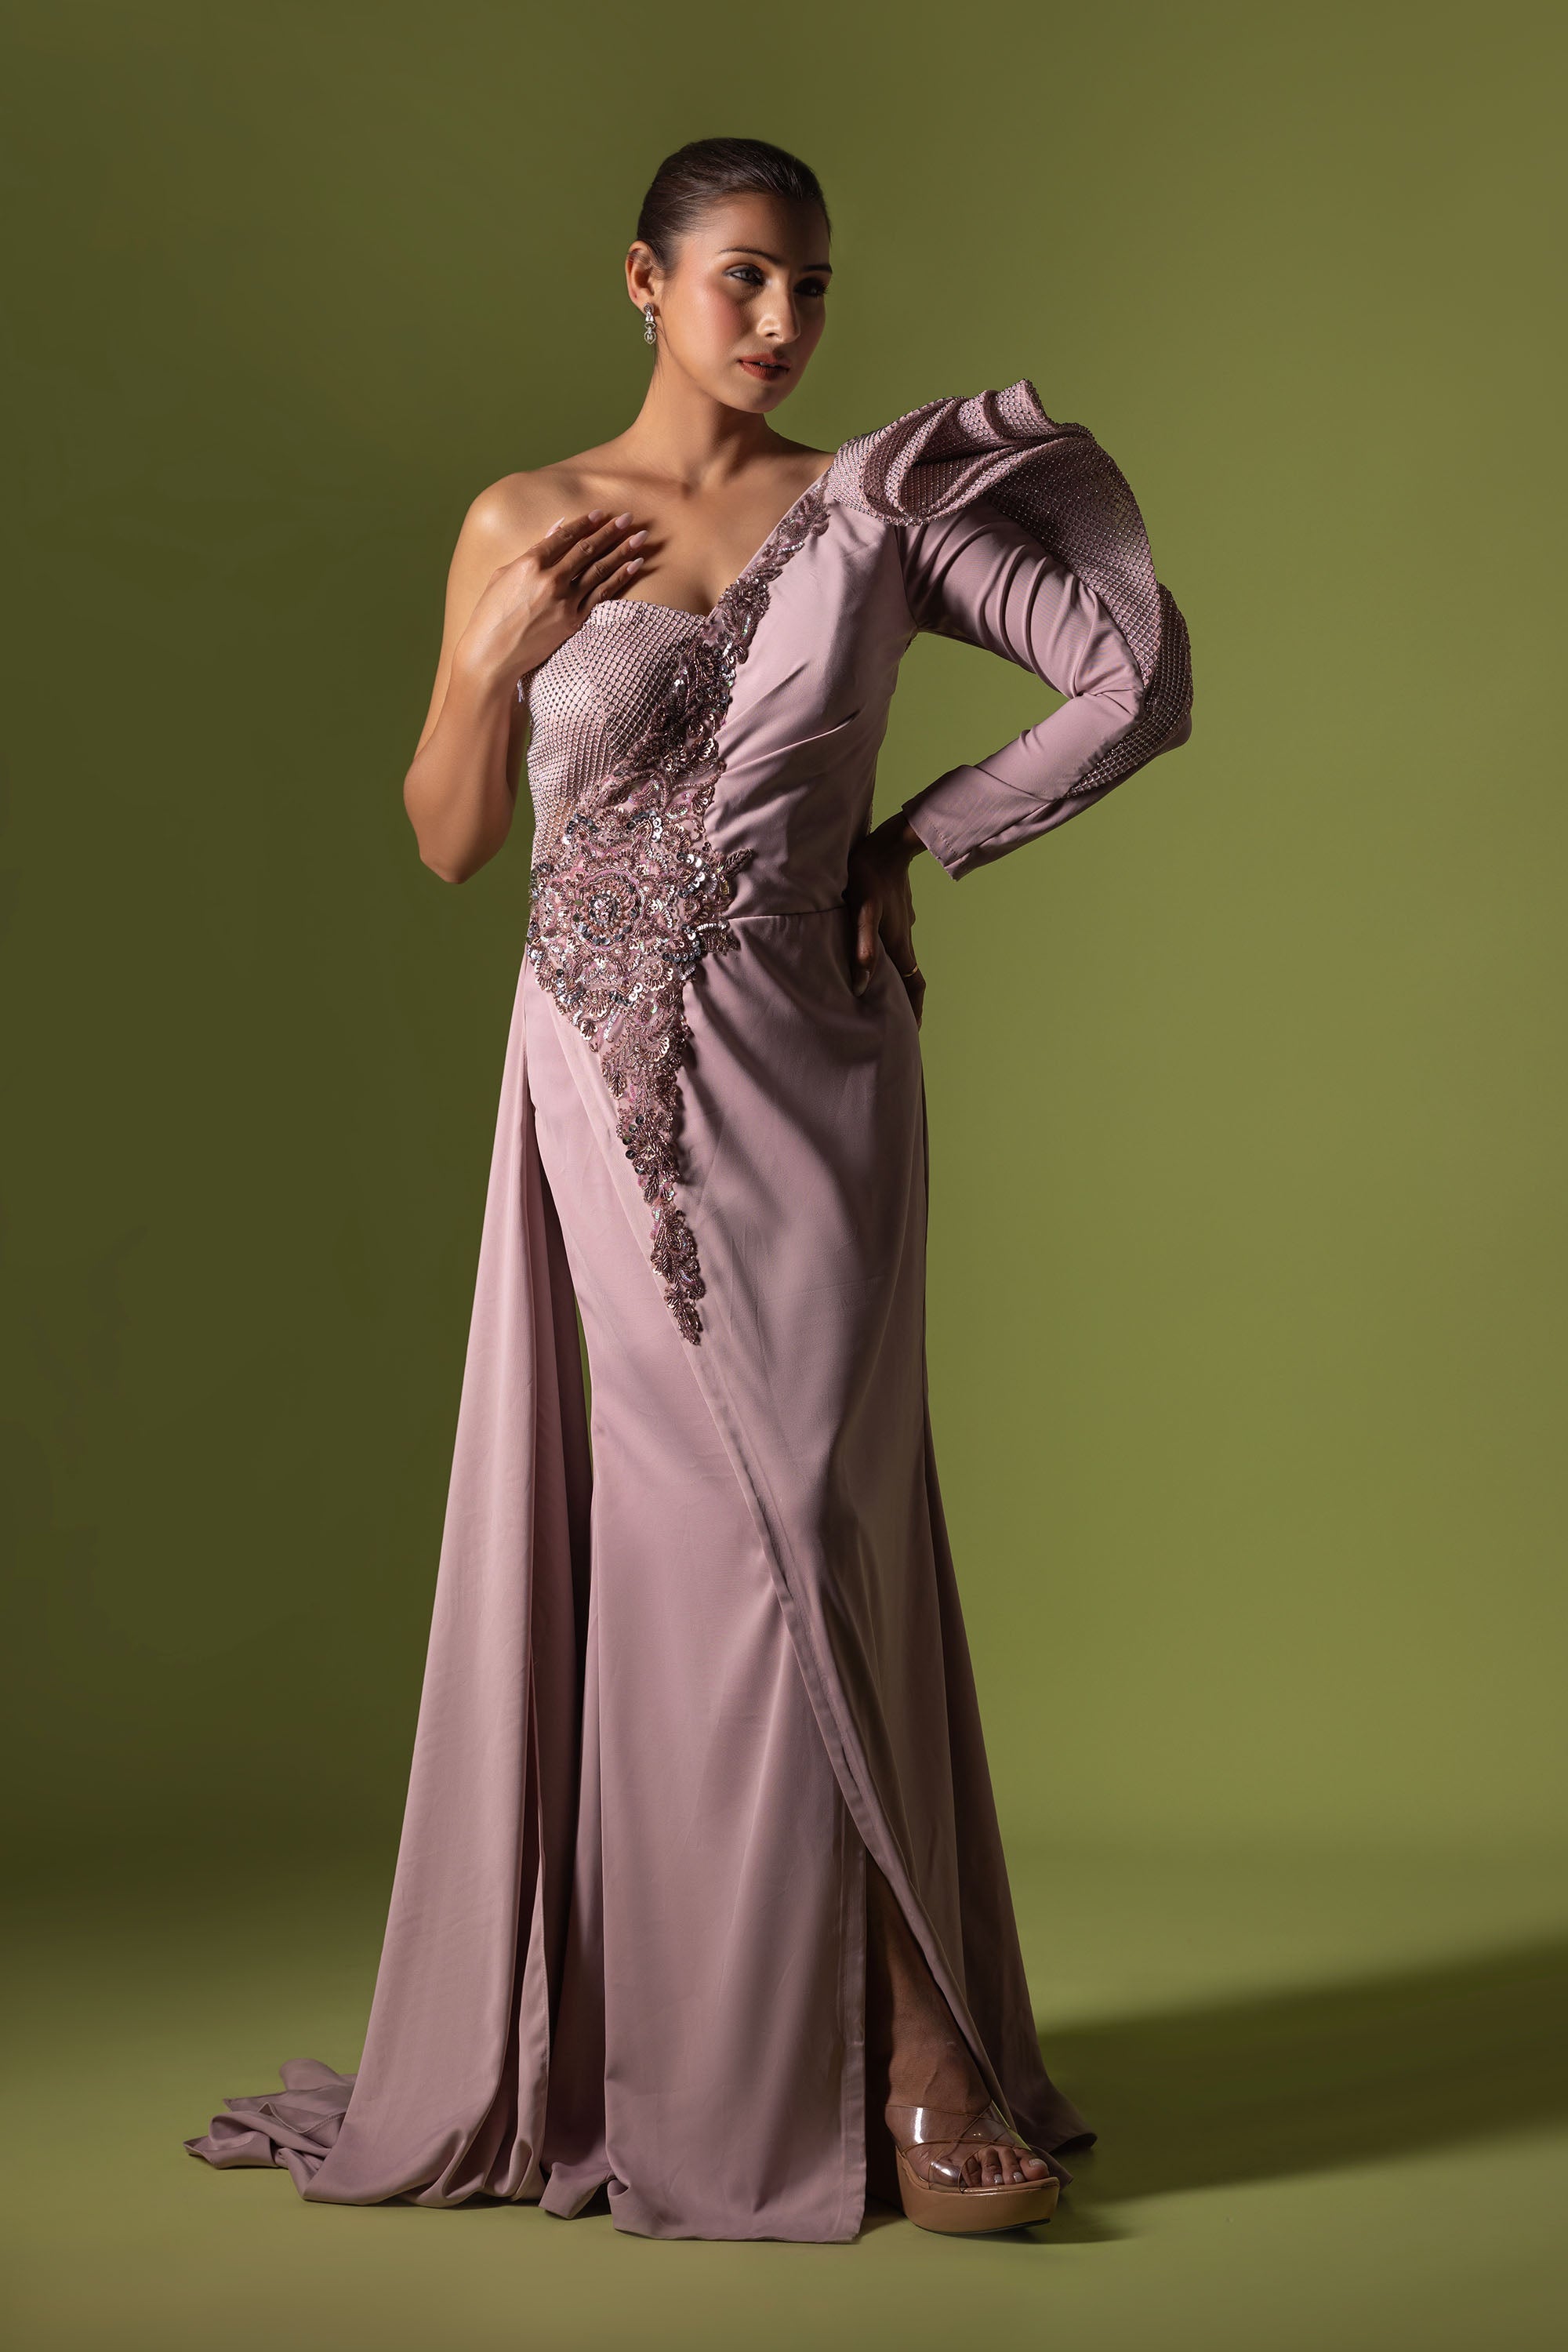 Silk dress with cutdana and sequins